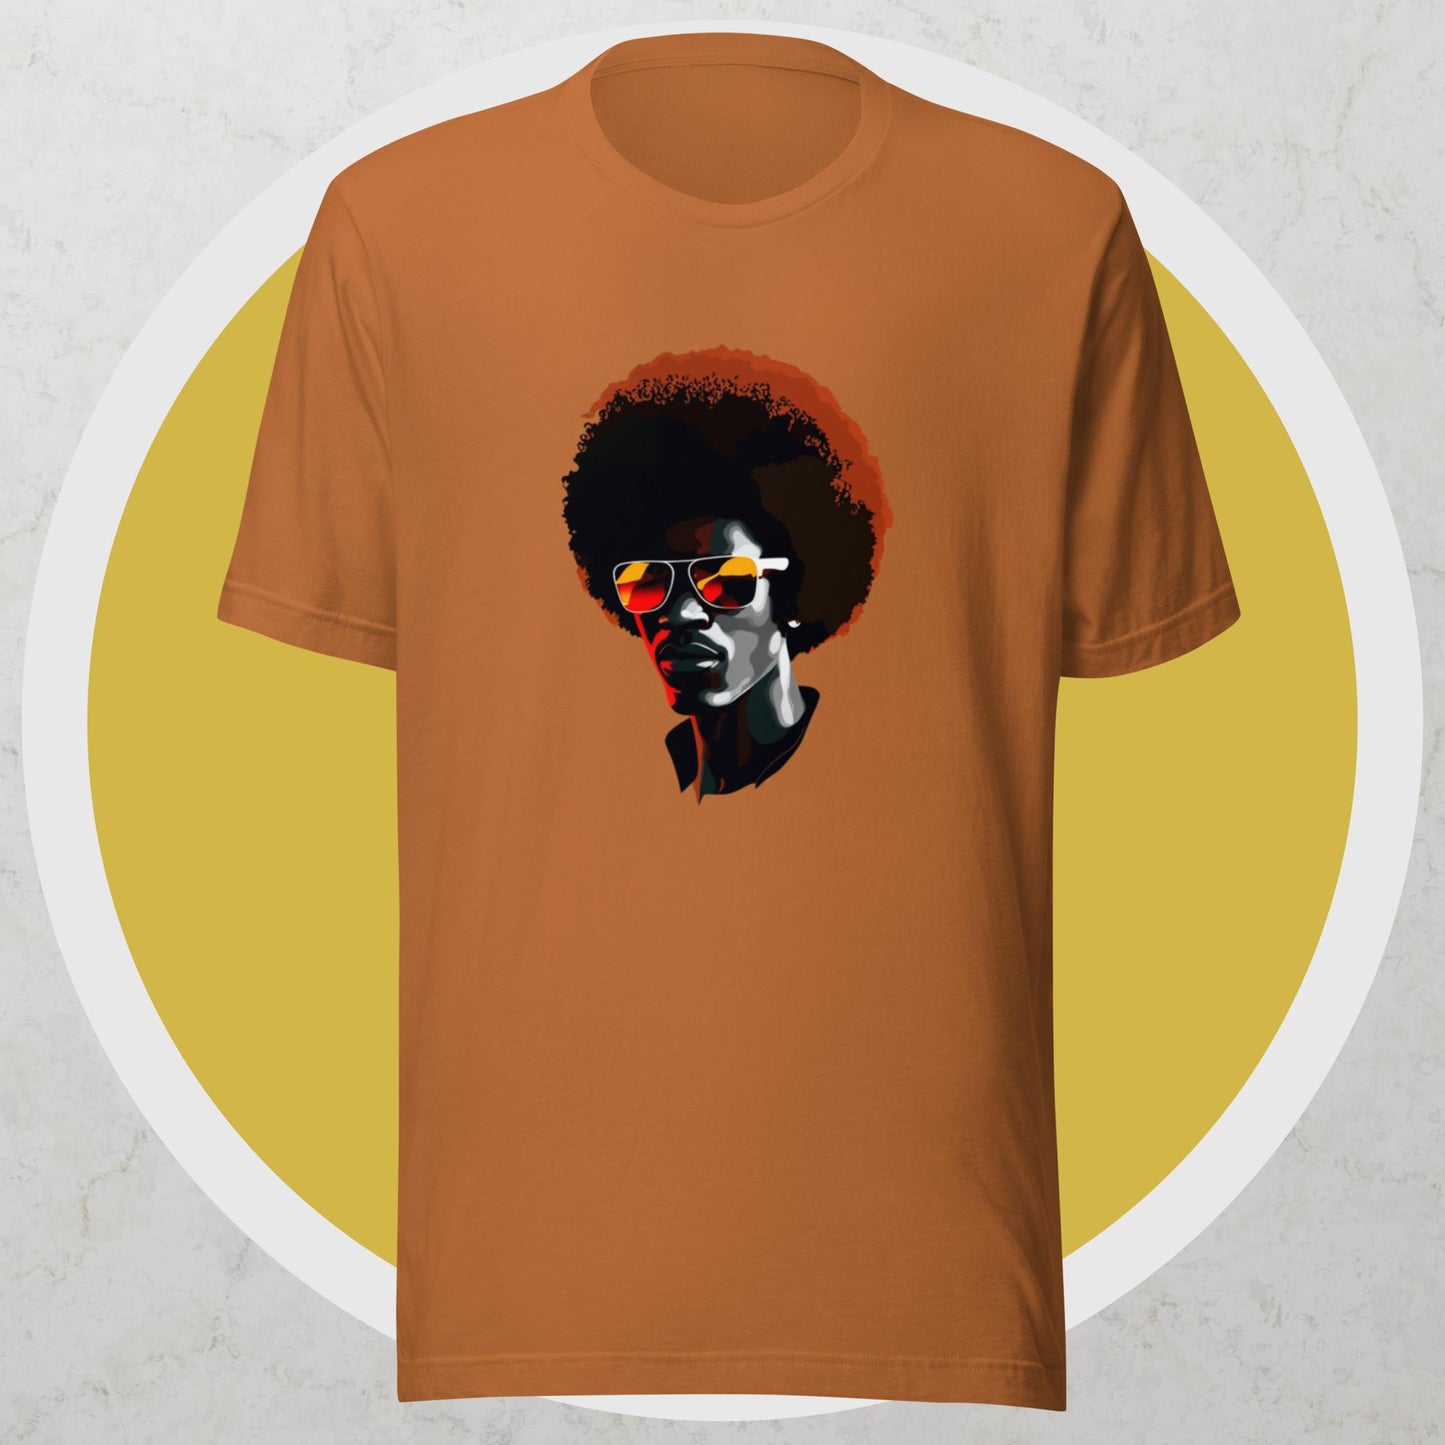 'THEE MANE EVENT': Unisex t-shirt